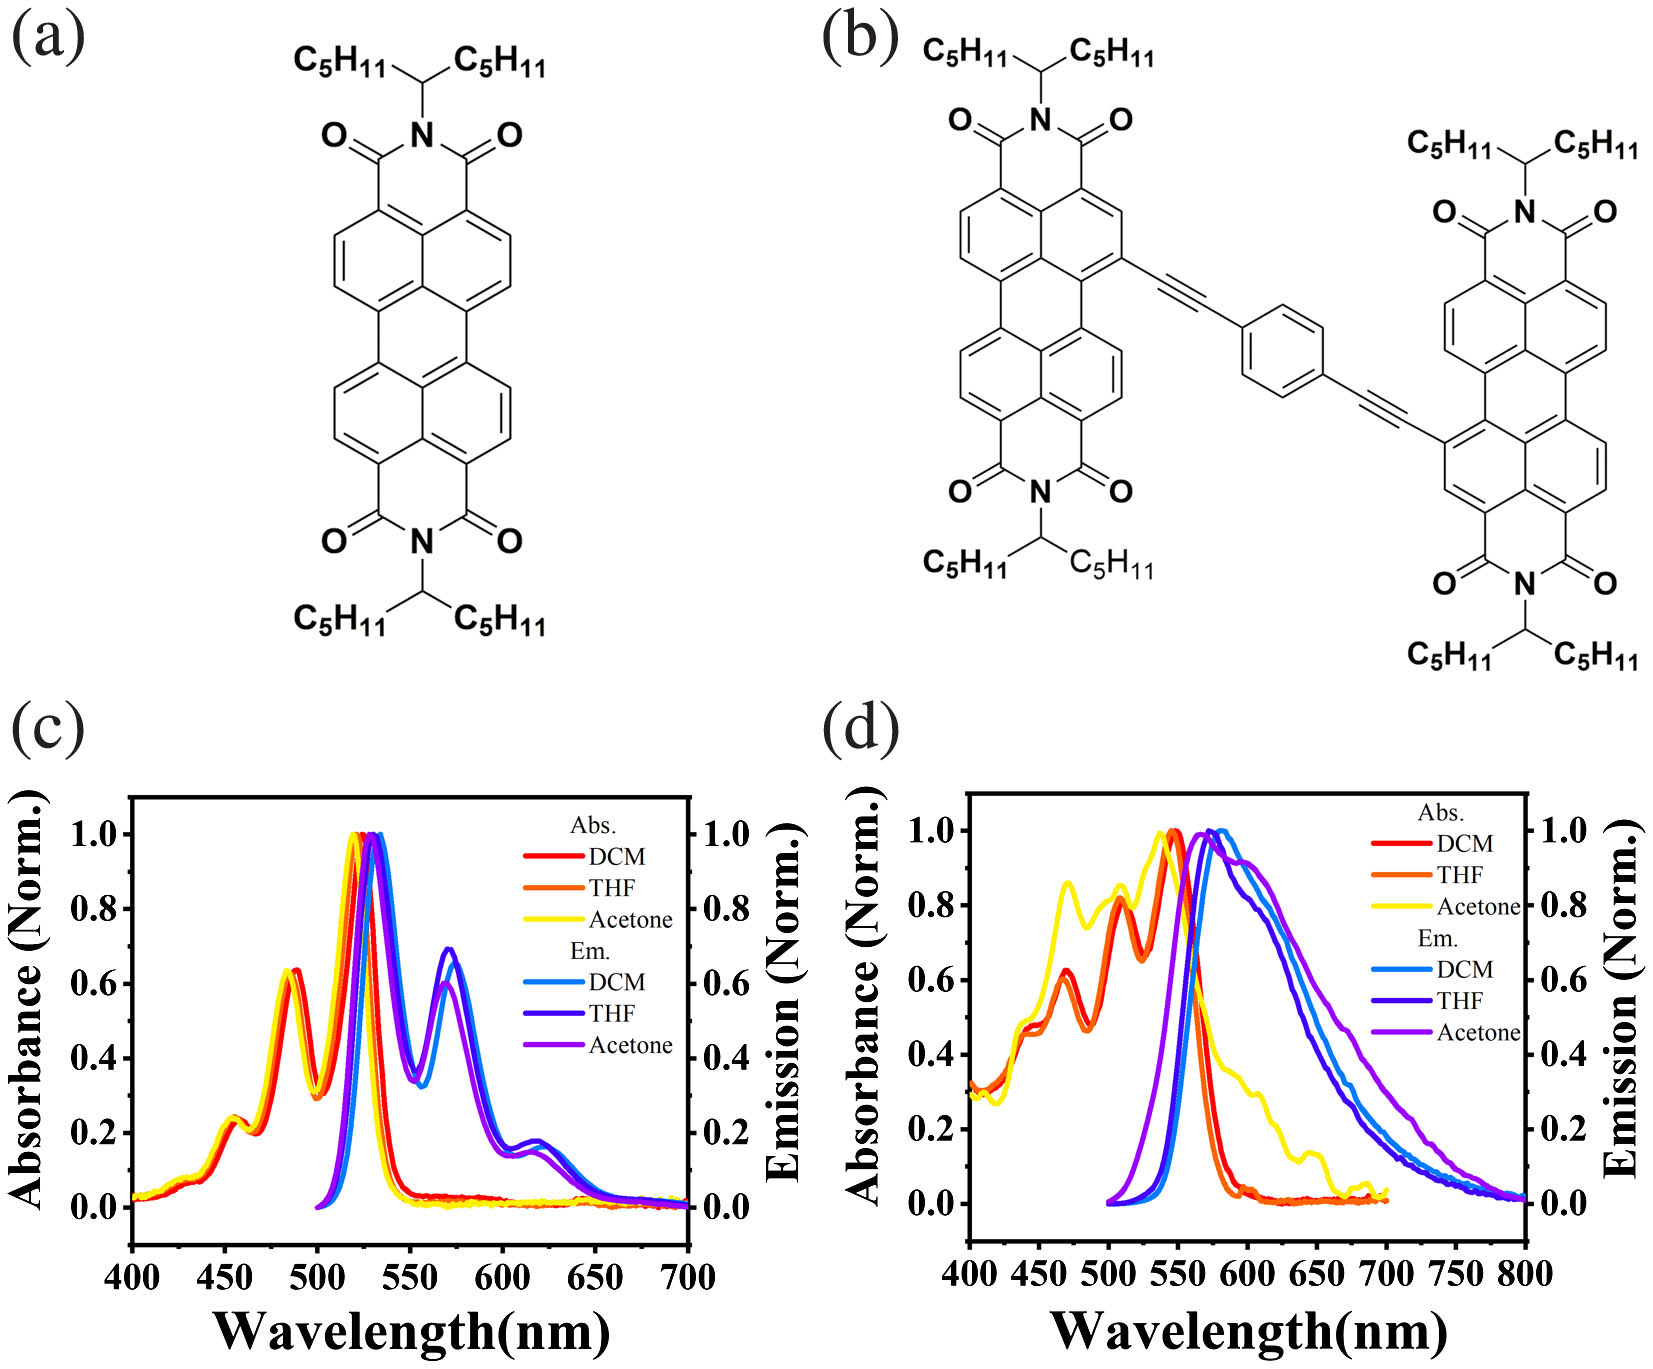 (a) Molecular structure of PDI-C5; (b) molecular structure of PDI-II; (c) normalized absorption and fluorescence spectra of PDI-C5 in solvents; (d) normalized absorption and fluorescence spectra of PDI- II in solvents.